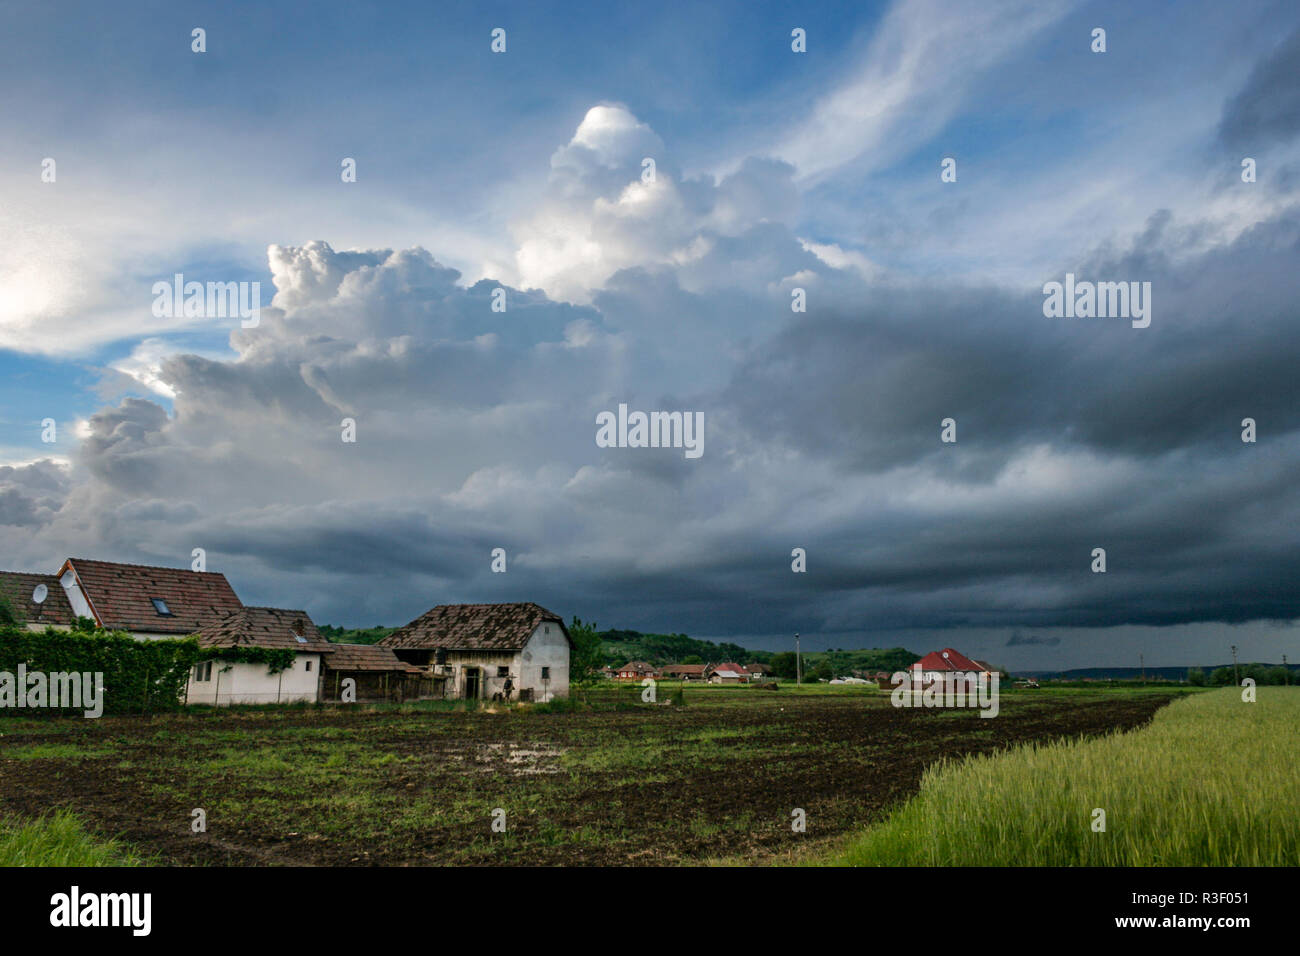 A menacing looking storm above the green fields of the Mures Valley, Romania Stock Photo